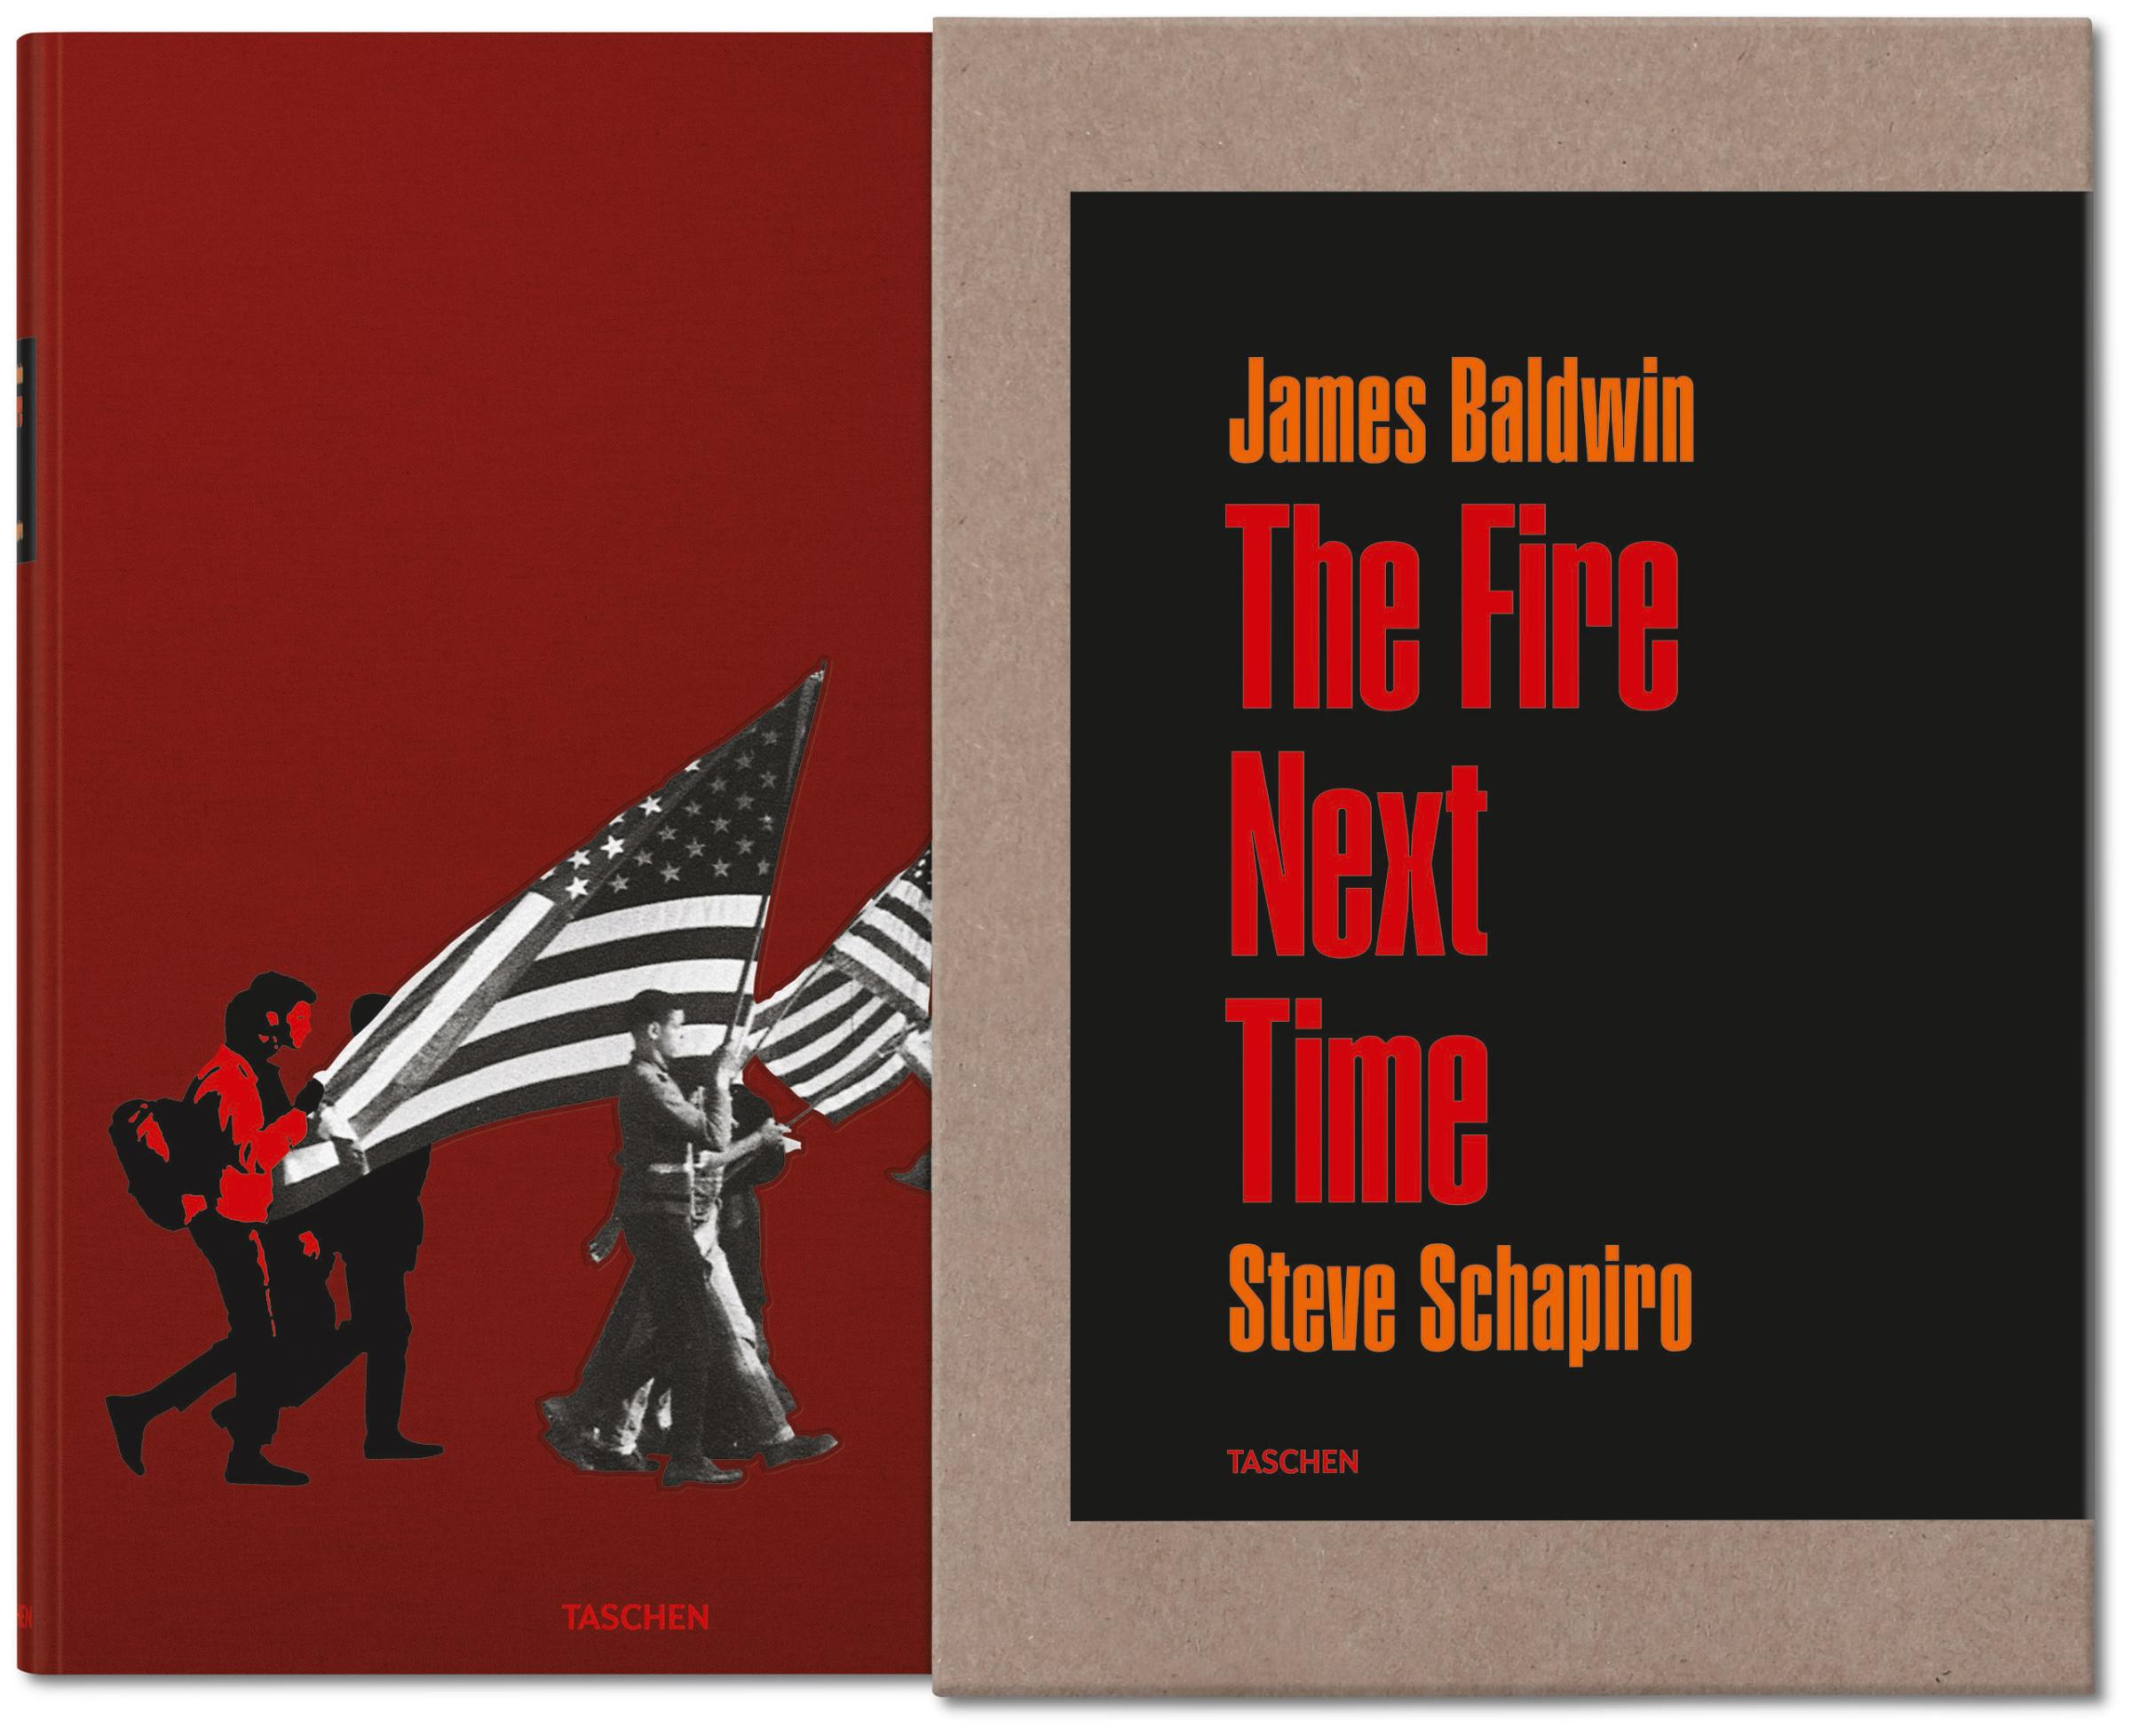 Book cover for James Baldwin, The Fire Next Time published by Taschen.